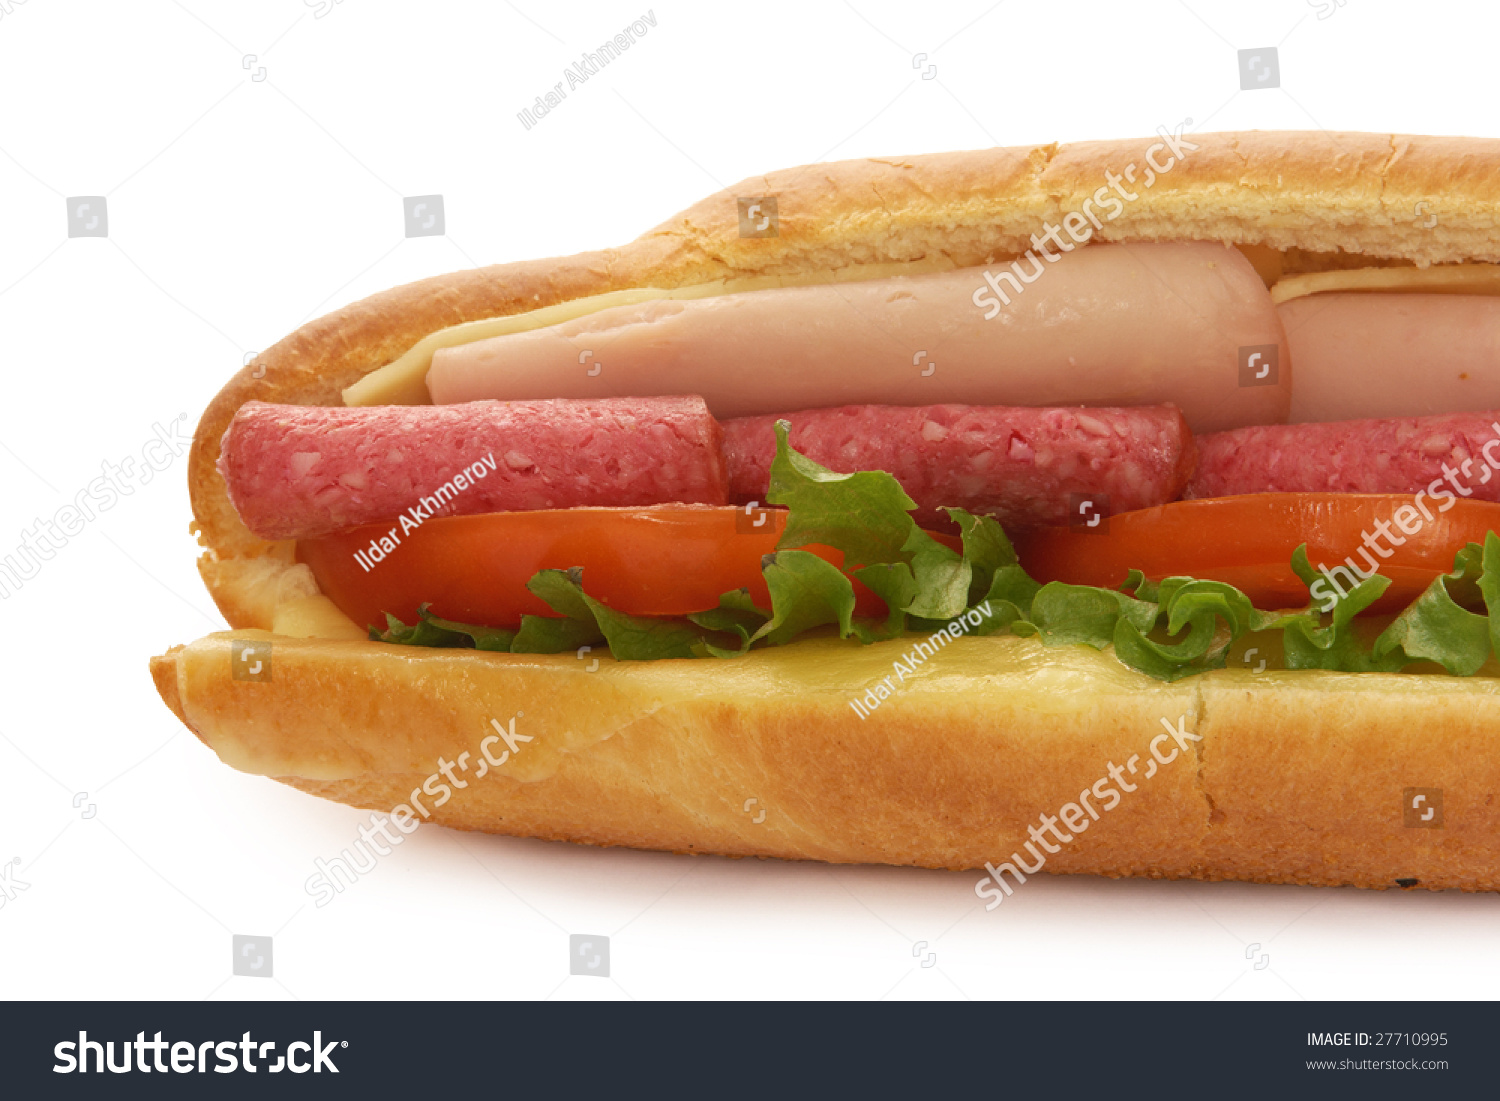 Salami And Ham Sandwich Isolated On White Background Stock Photo ...